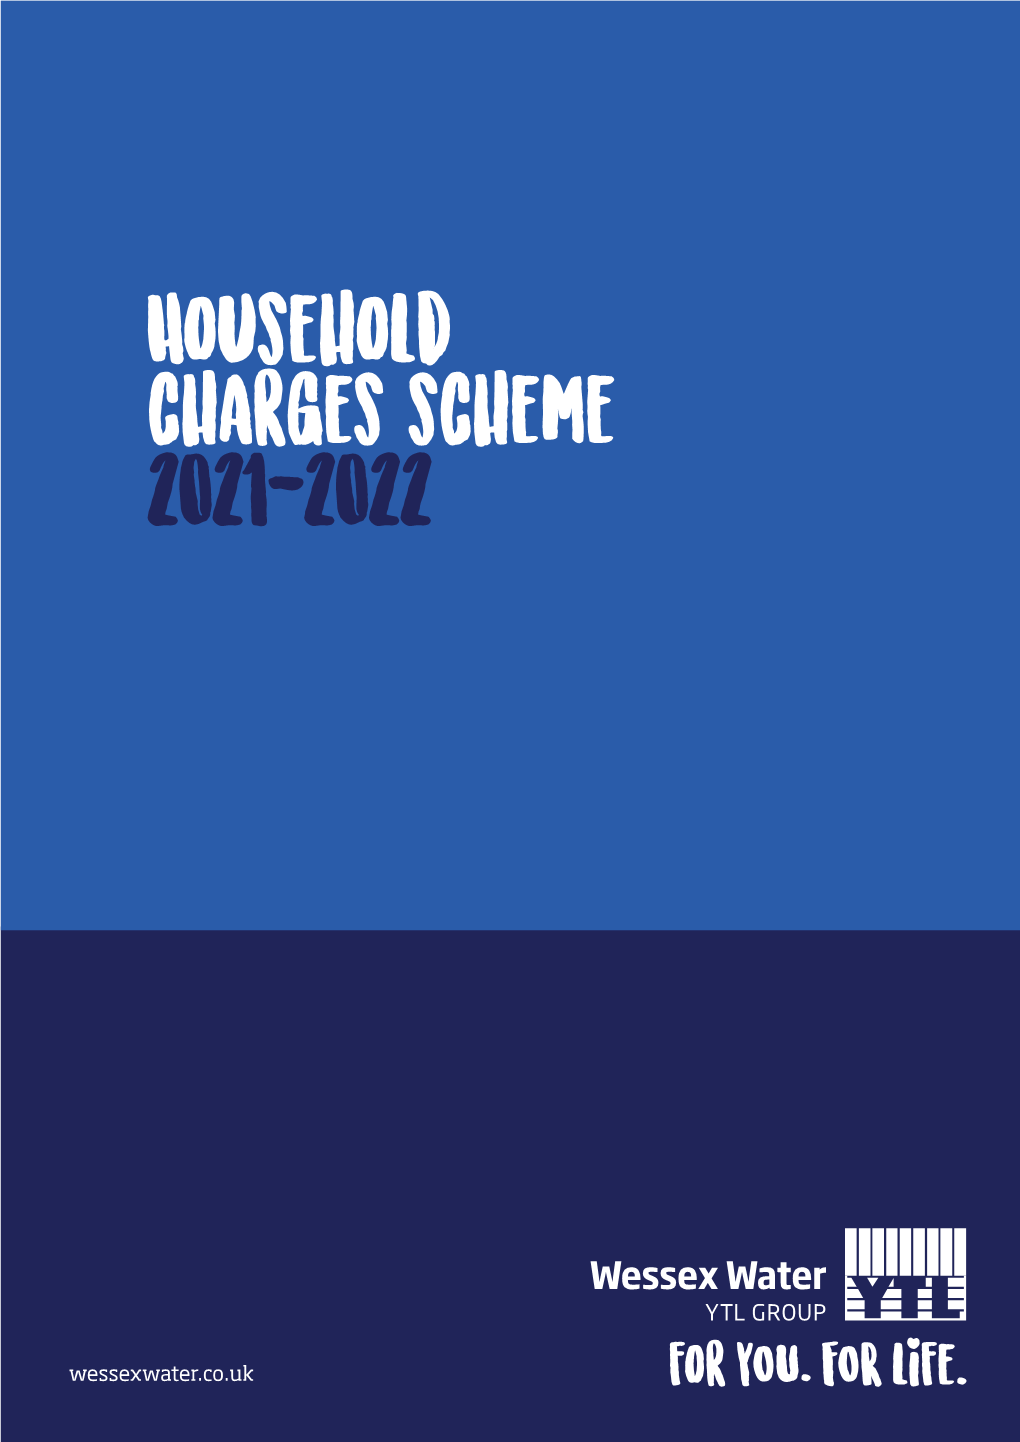 Household Charges Scheme 2021-2022